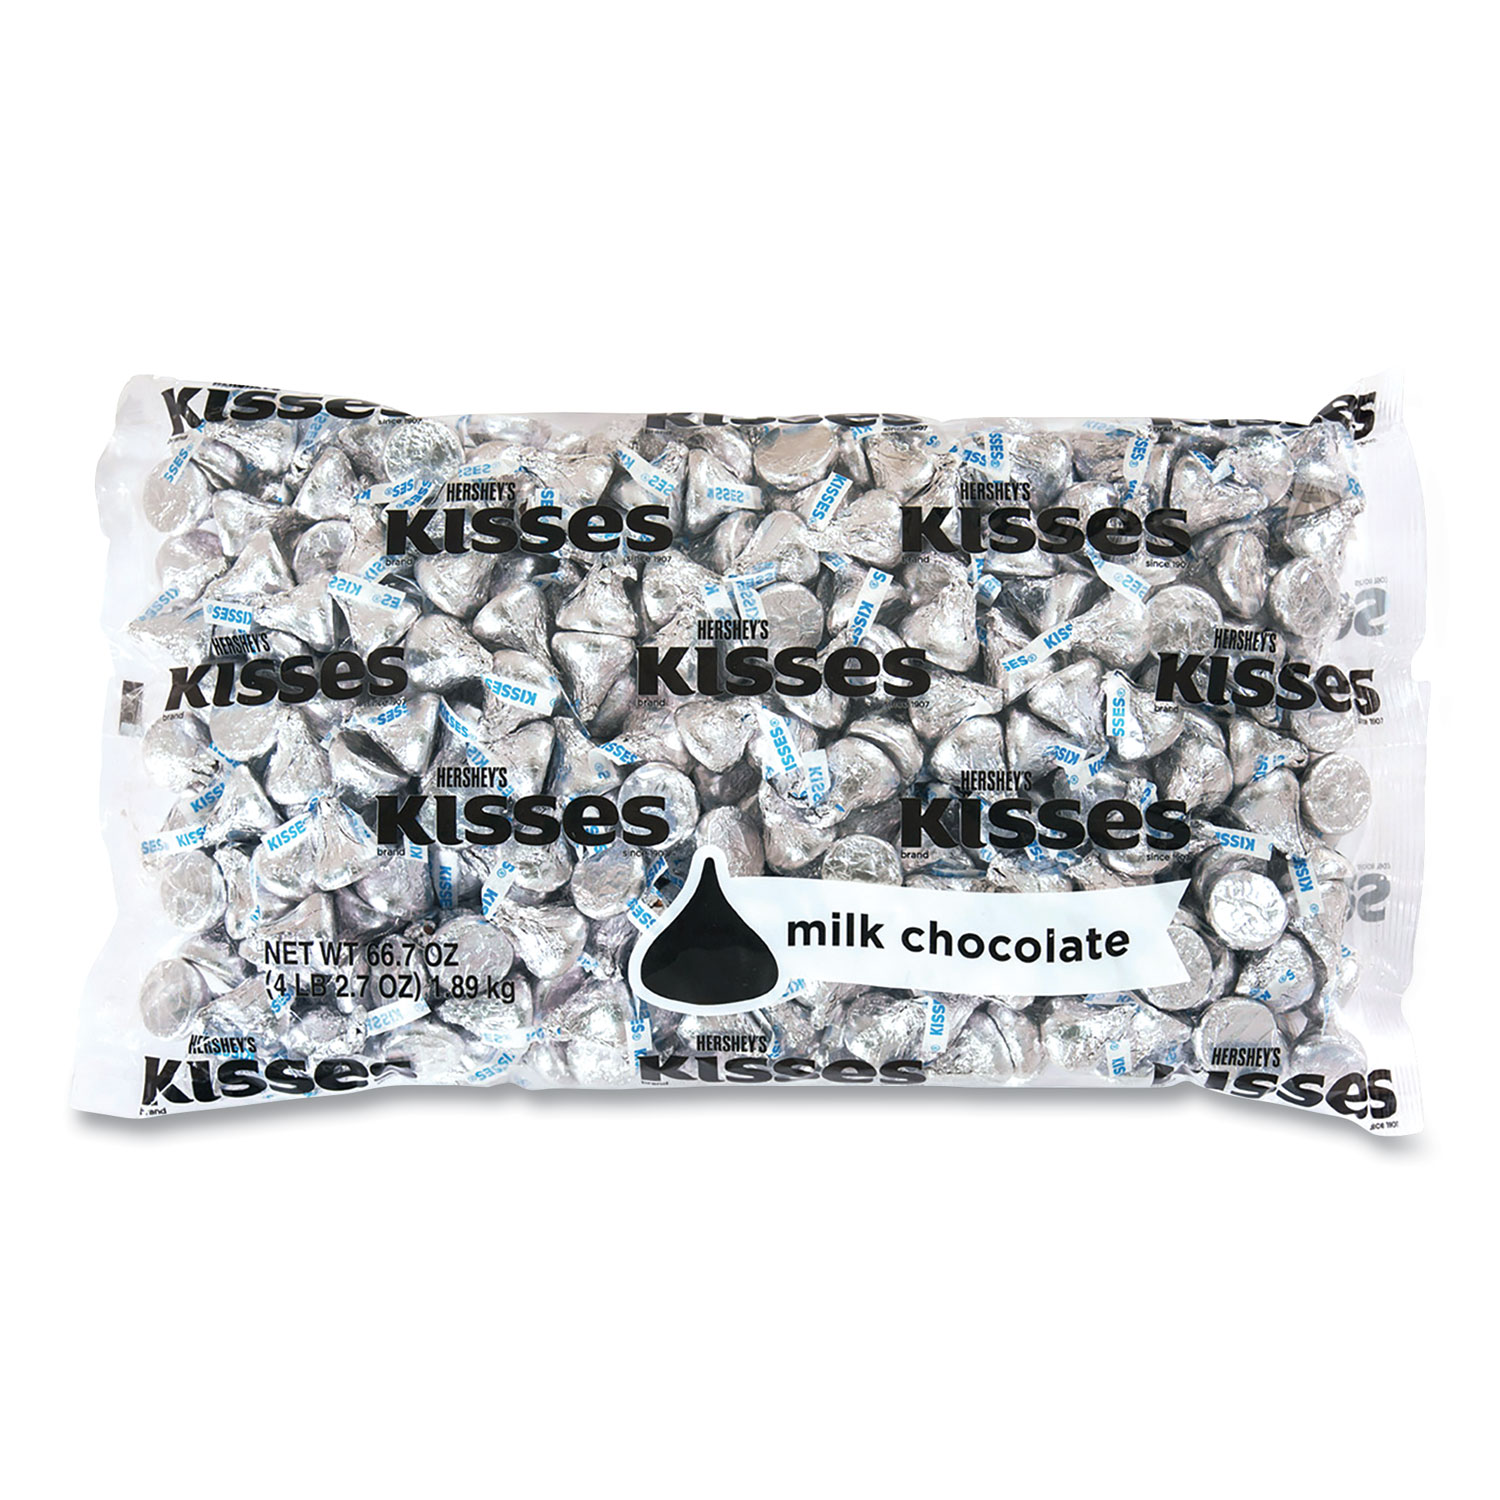  Hershey's 13345 KISSES, Milk Chocolate, Silver Wrappers, 66.7 oz Bag, Free Delivery in 1-4 Business Days (GRR24600054) 